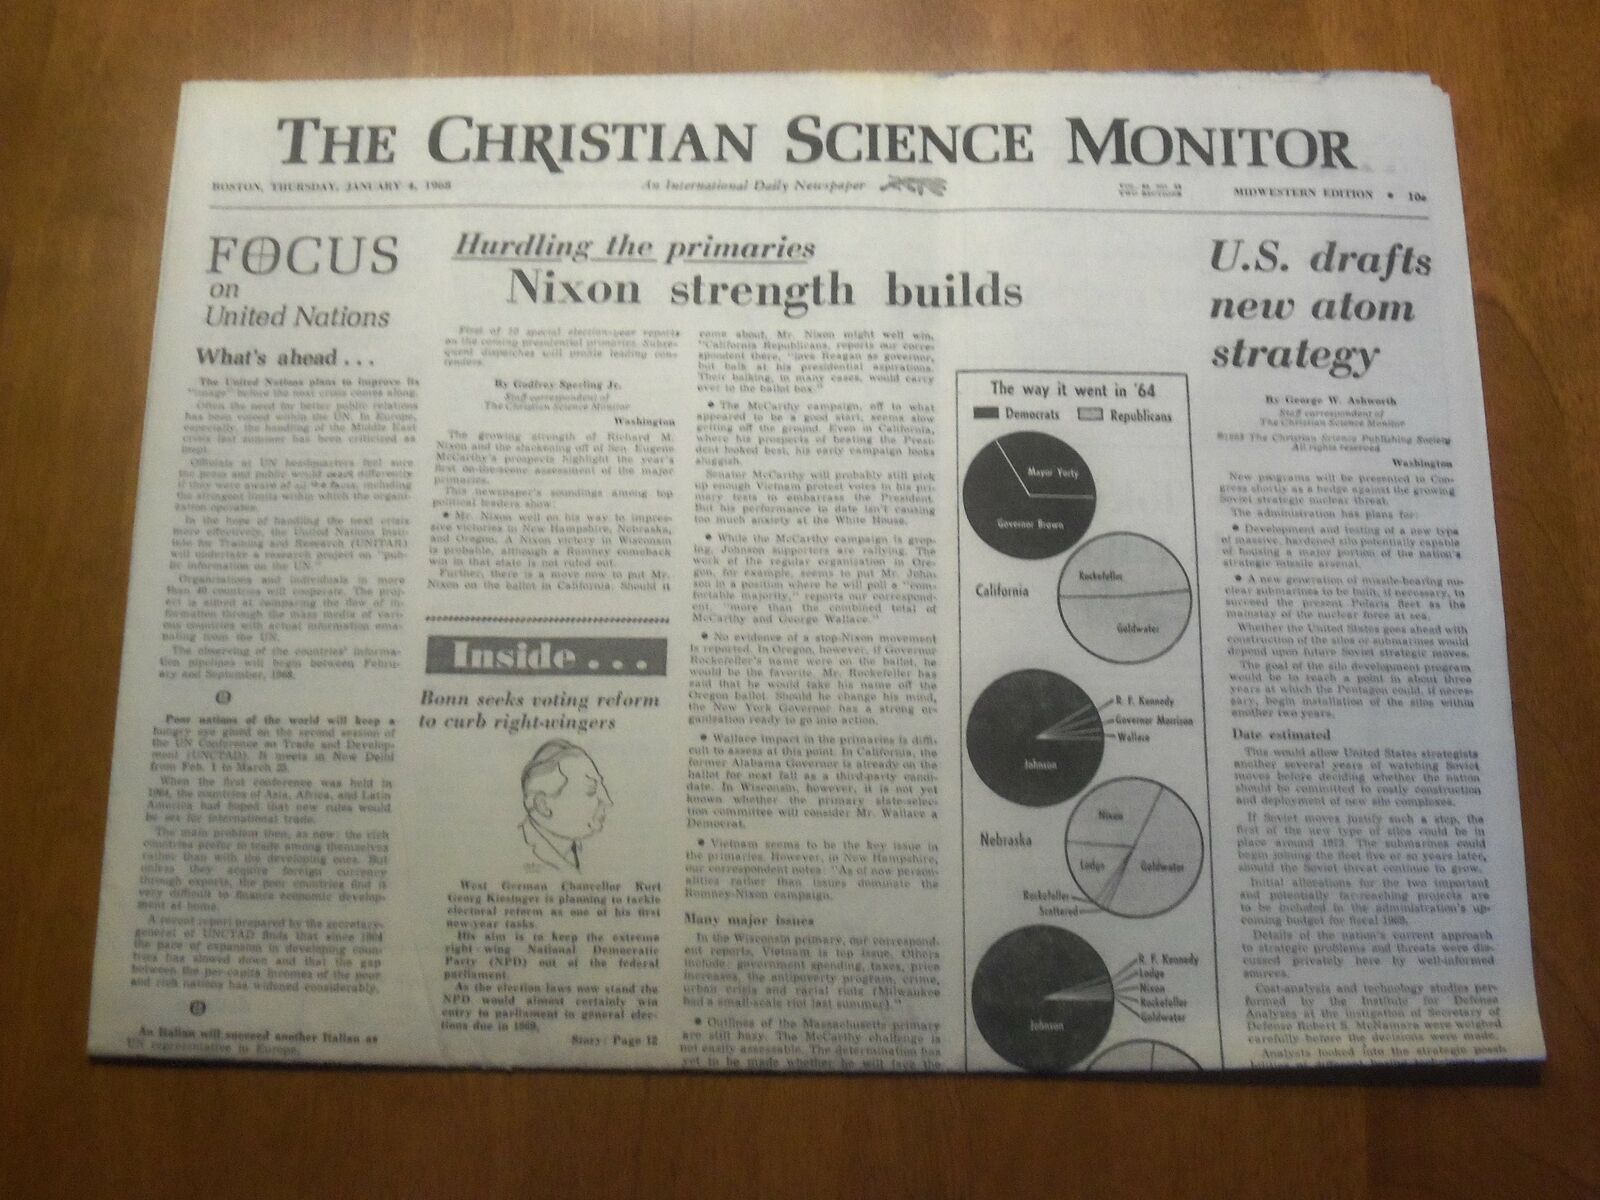 1968 JAN 4 THE CHRISTIAN SCIENCE MONITOR - NIXON STRENGHT BUILDS - NP 4616